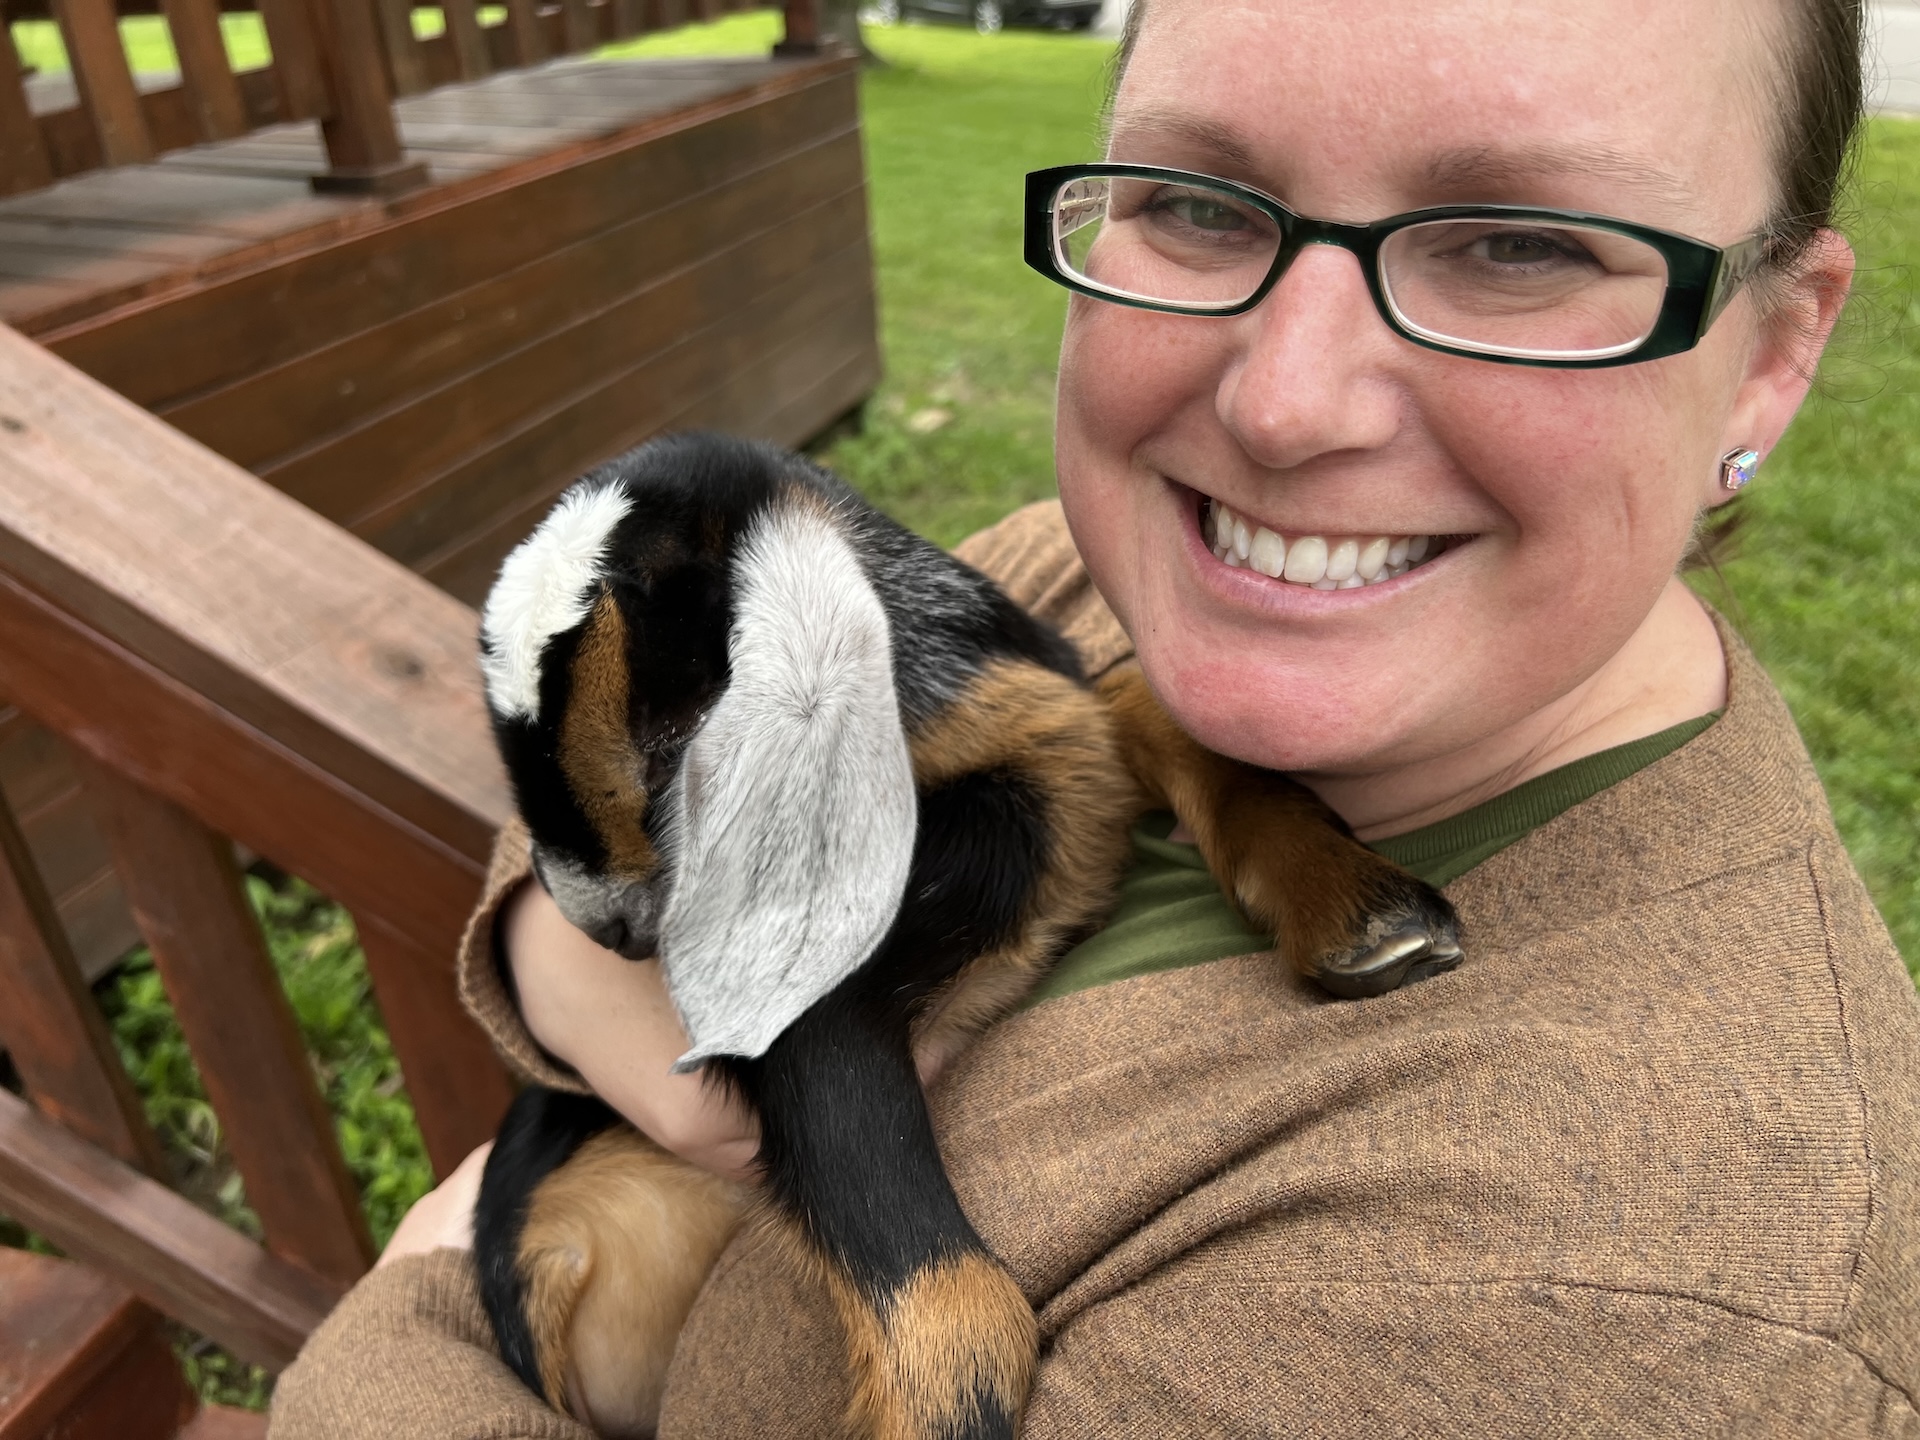 Image of IAUC Founder with a baby goat.